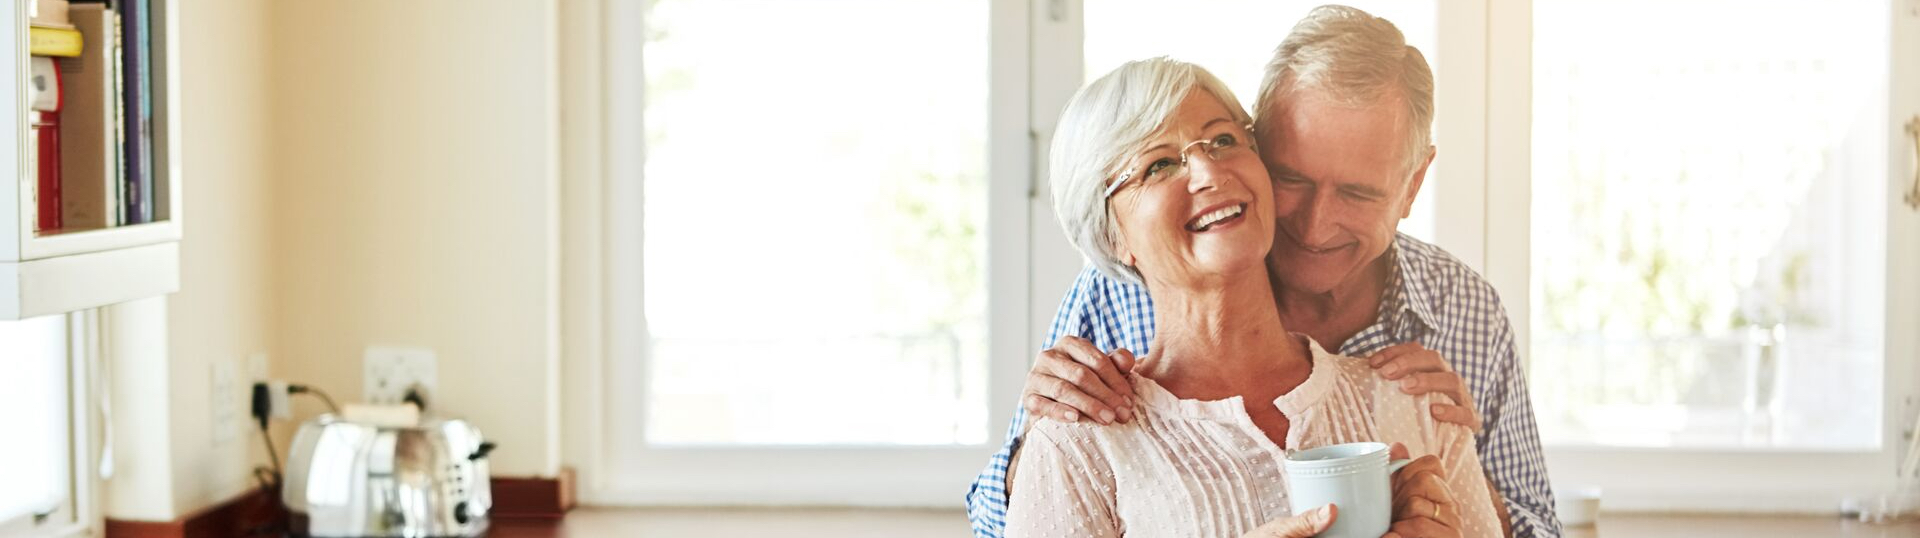 What To Look For in an Assisted Living or Memory Care Community